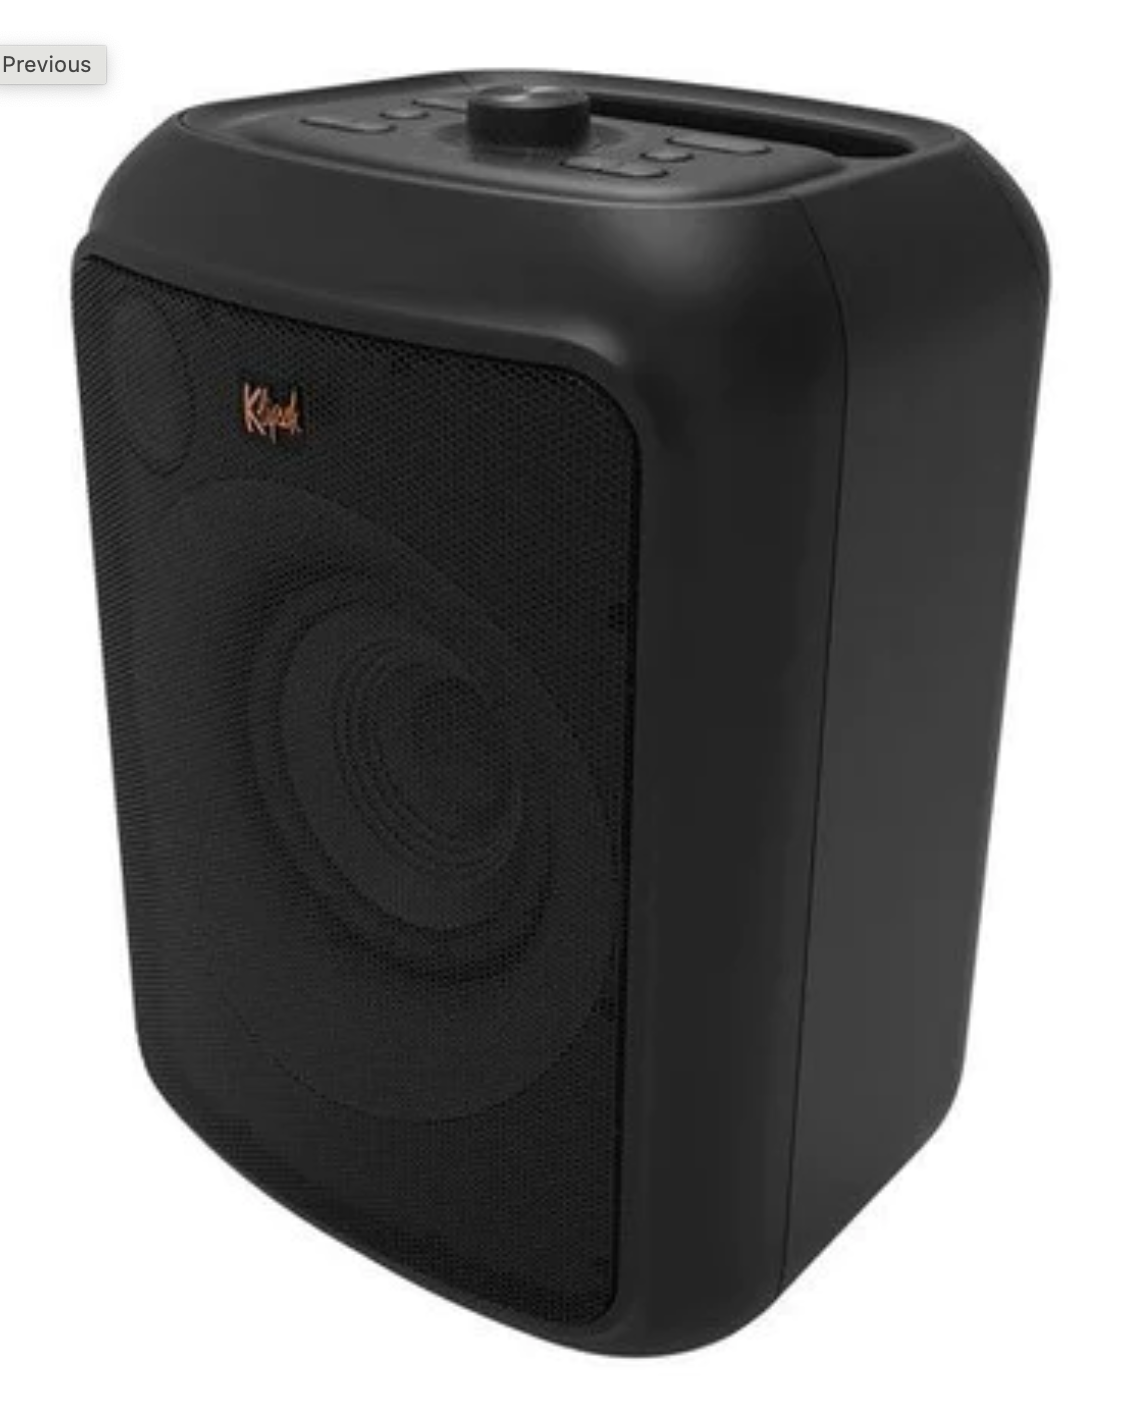 Klipsch GIG XL portable Bluetooth Speaker.  Image with Grille